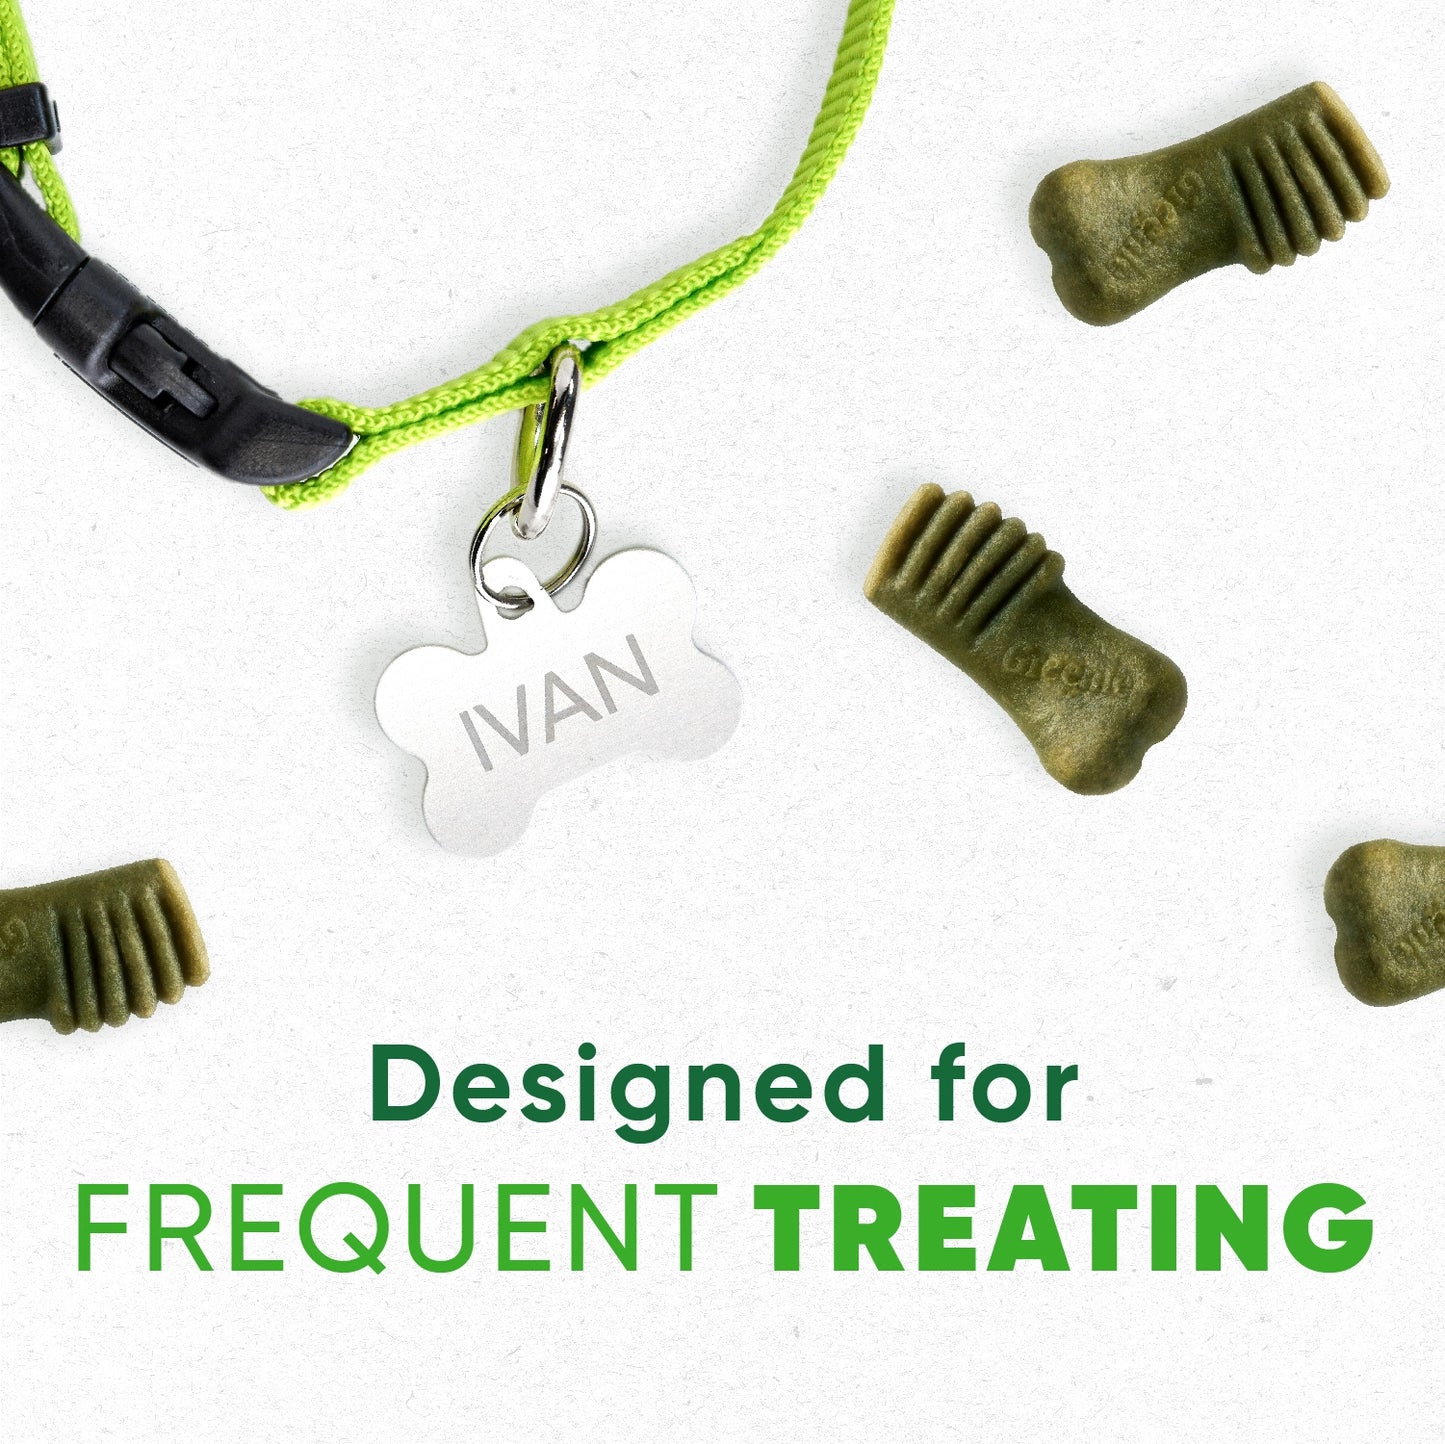 Designed for frequent treating